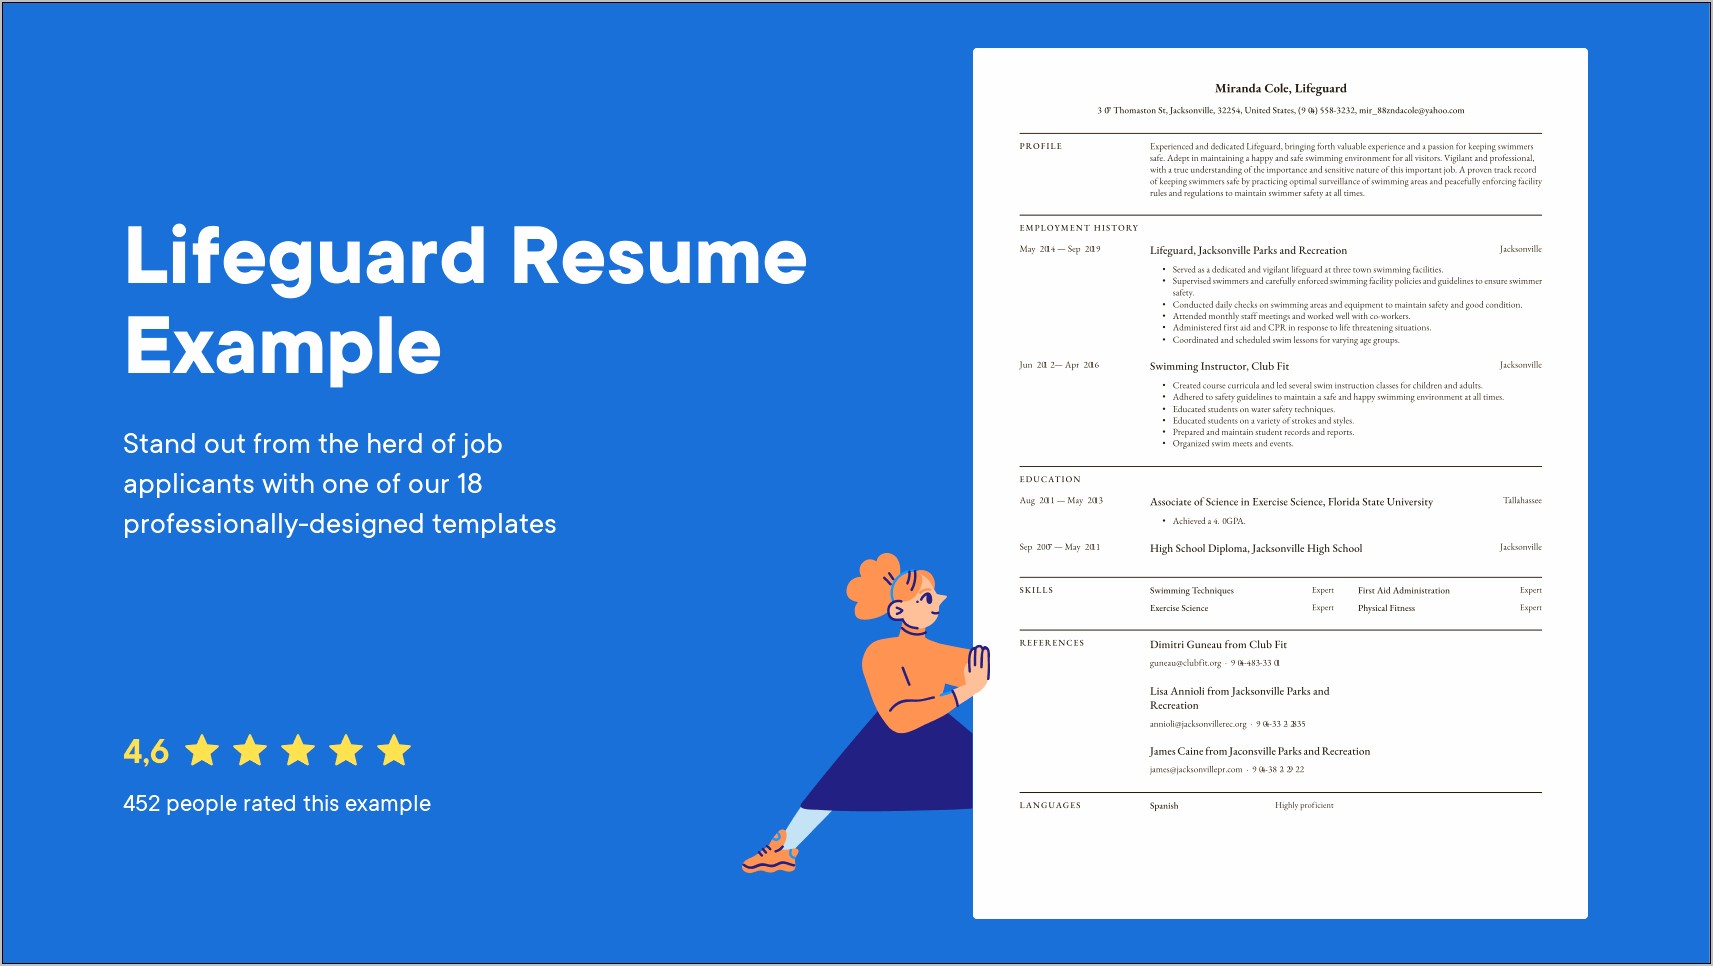 Resume Objective For Lifeguard Position